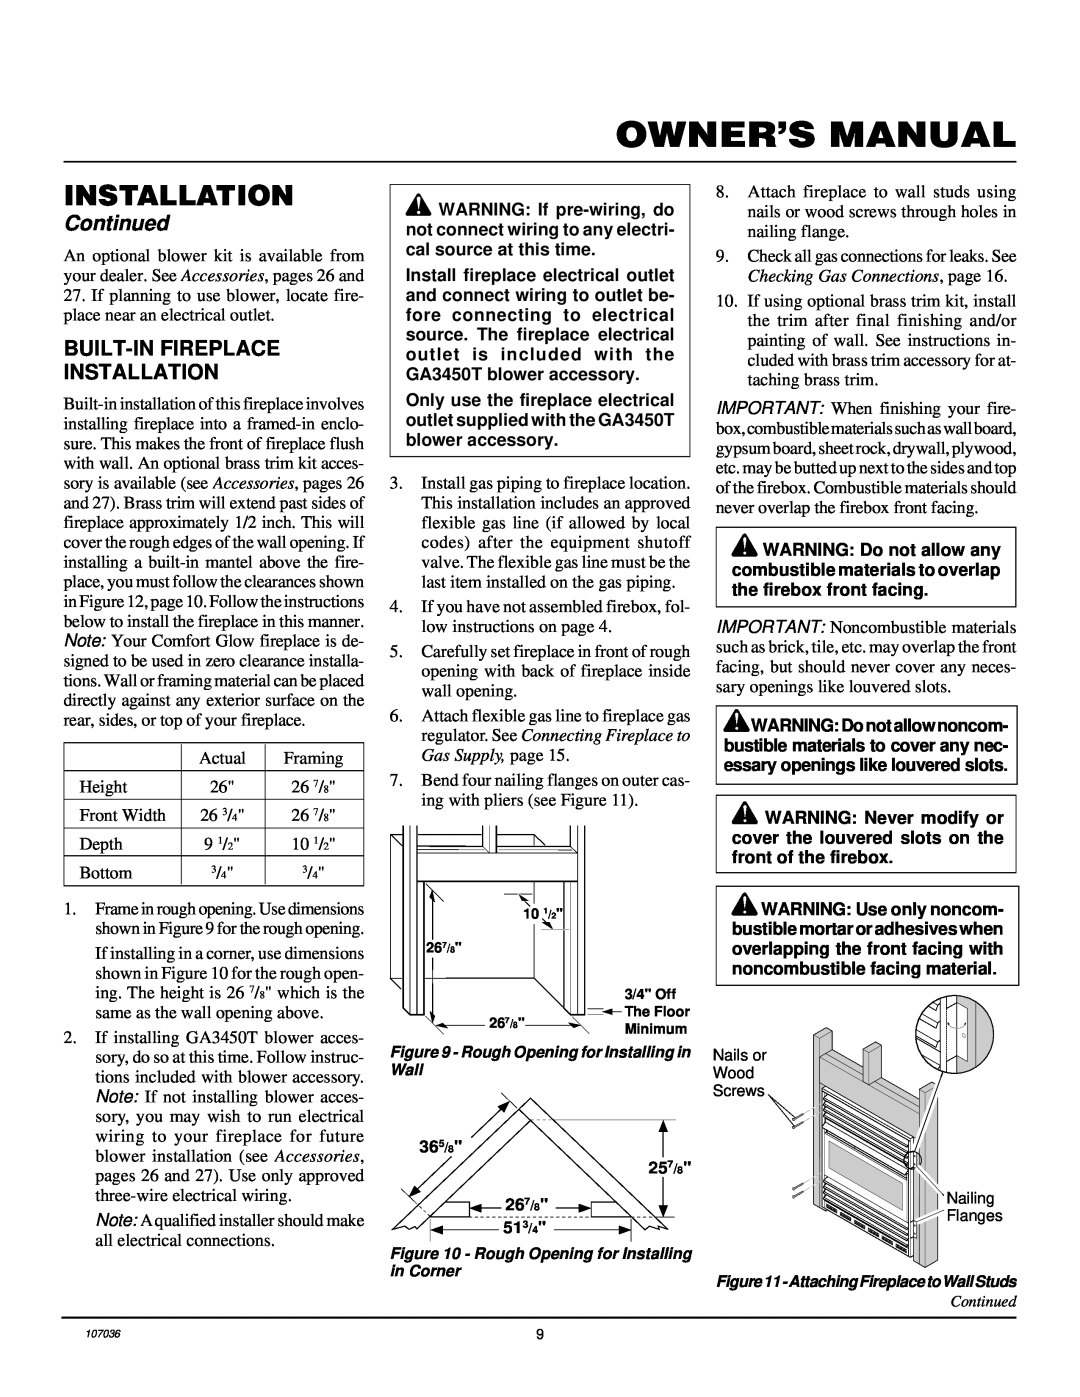 Desa CGCFTP 14, 000 to 26 installation manual Built-Infireplace Installation, Continued 